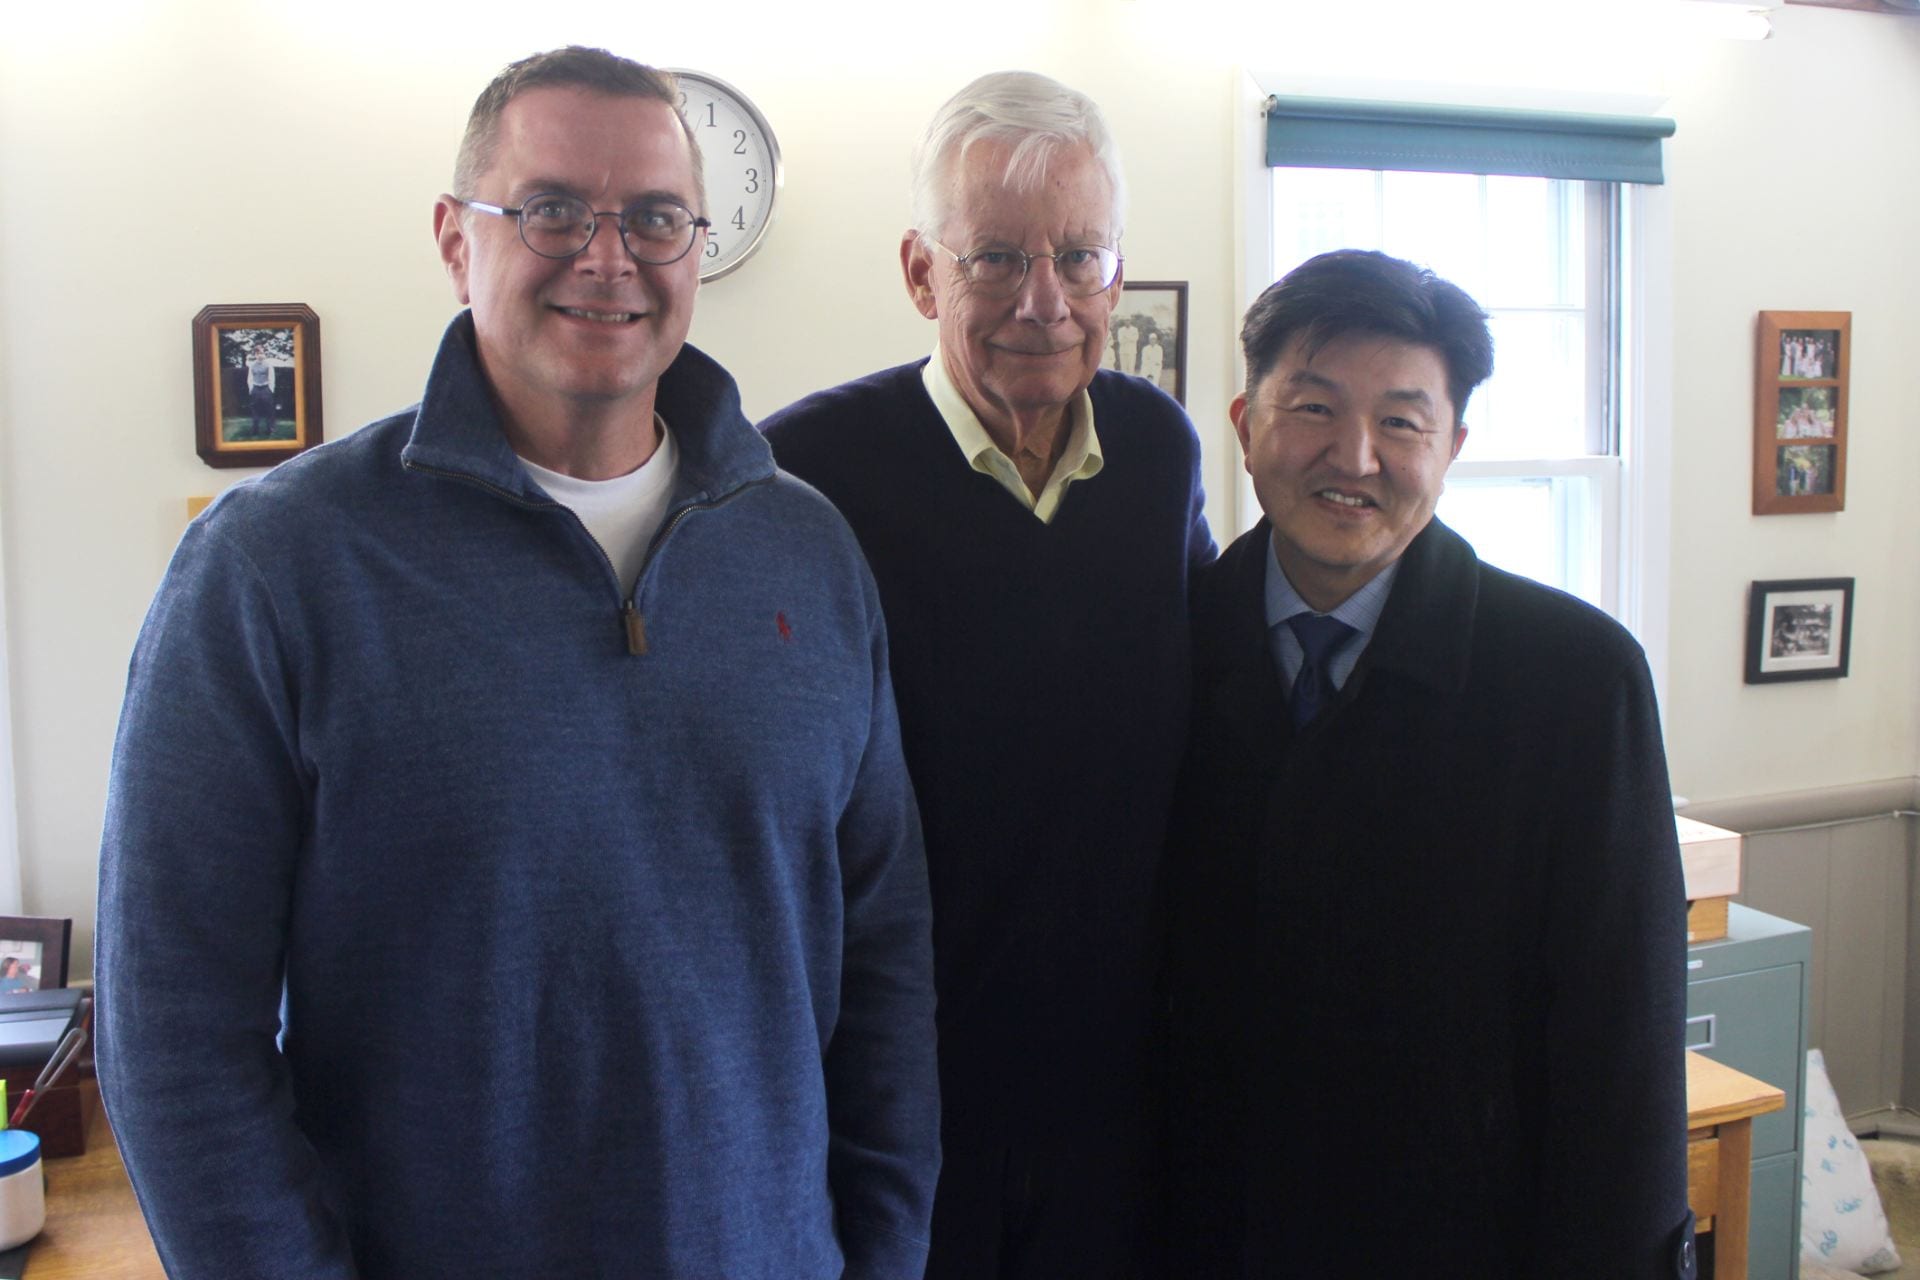 Charlie Marshall (center) pictured with Steve Dillen, assistant teaching professor of electrical engineering (left), and Jungwoo Ryoo, head of the Division of Business, Engineering, and Information Sciences and Technology and professor of information sciences and technology (right), at Penn State Altoona. 